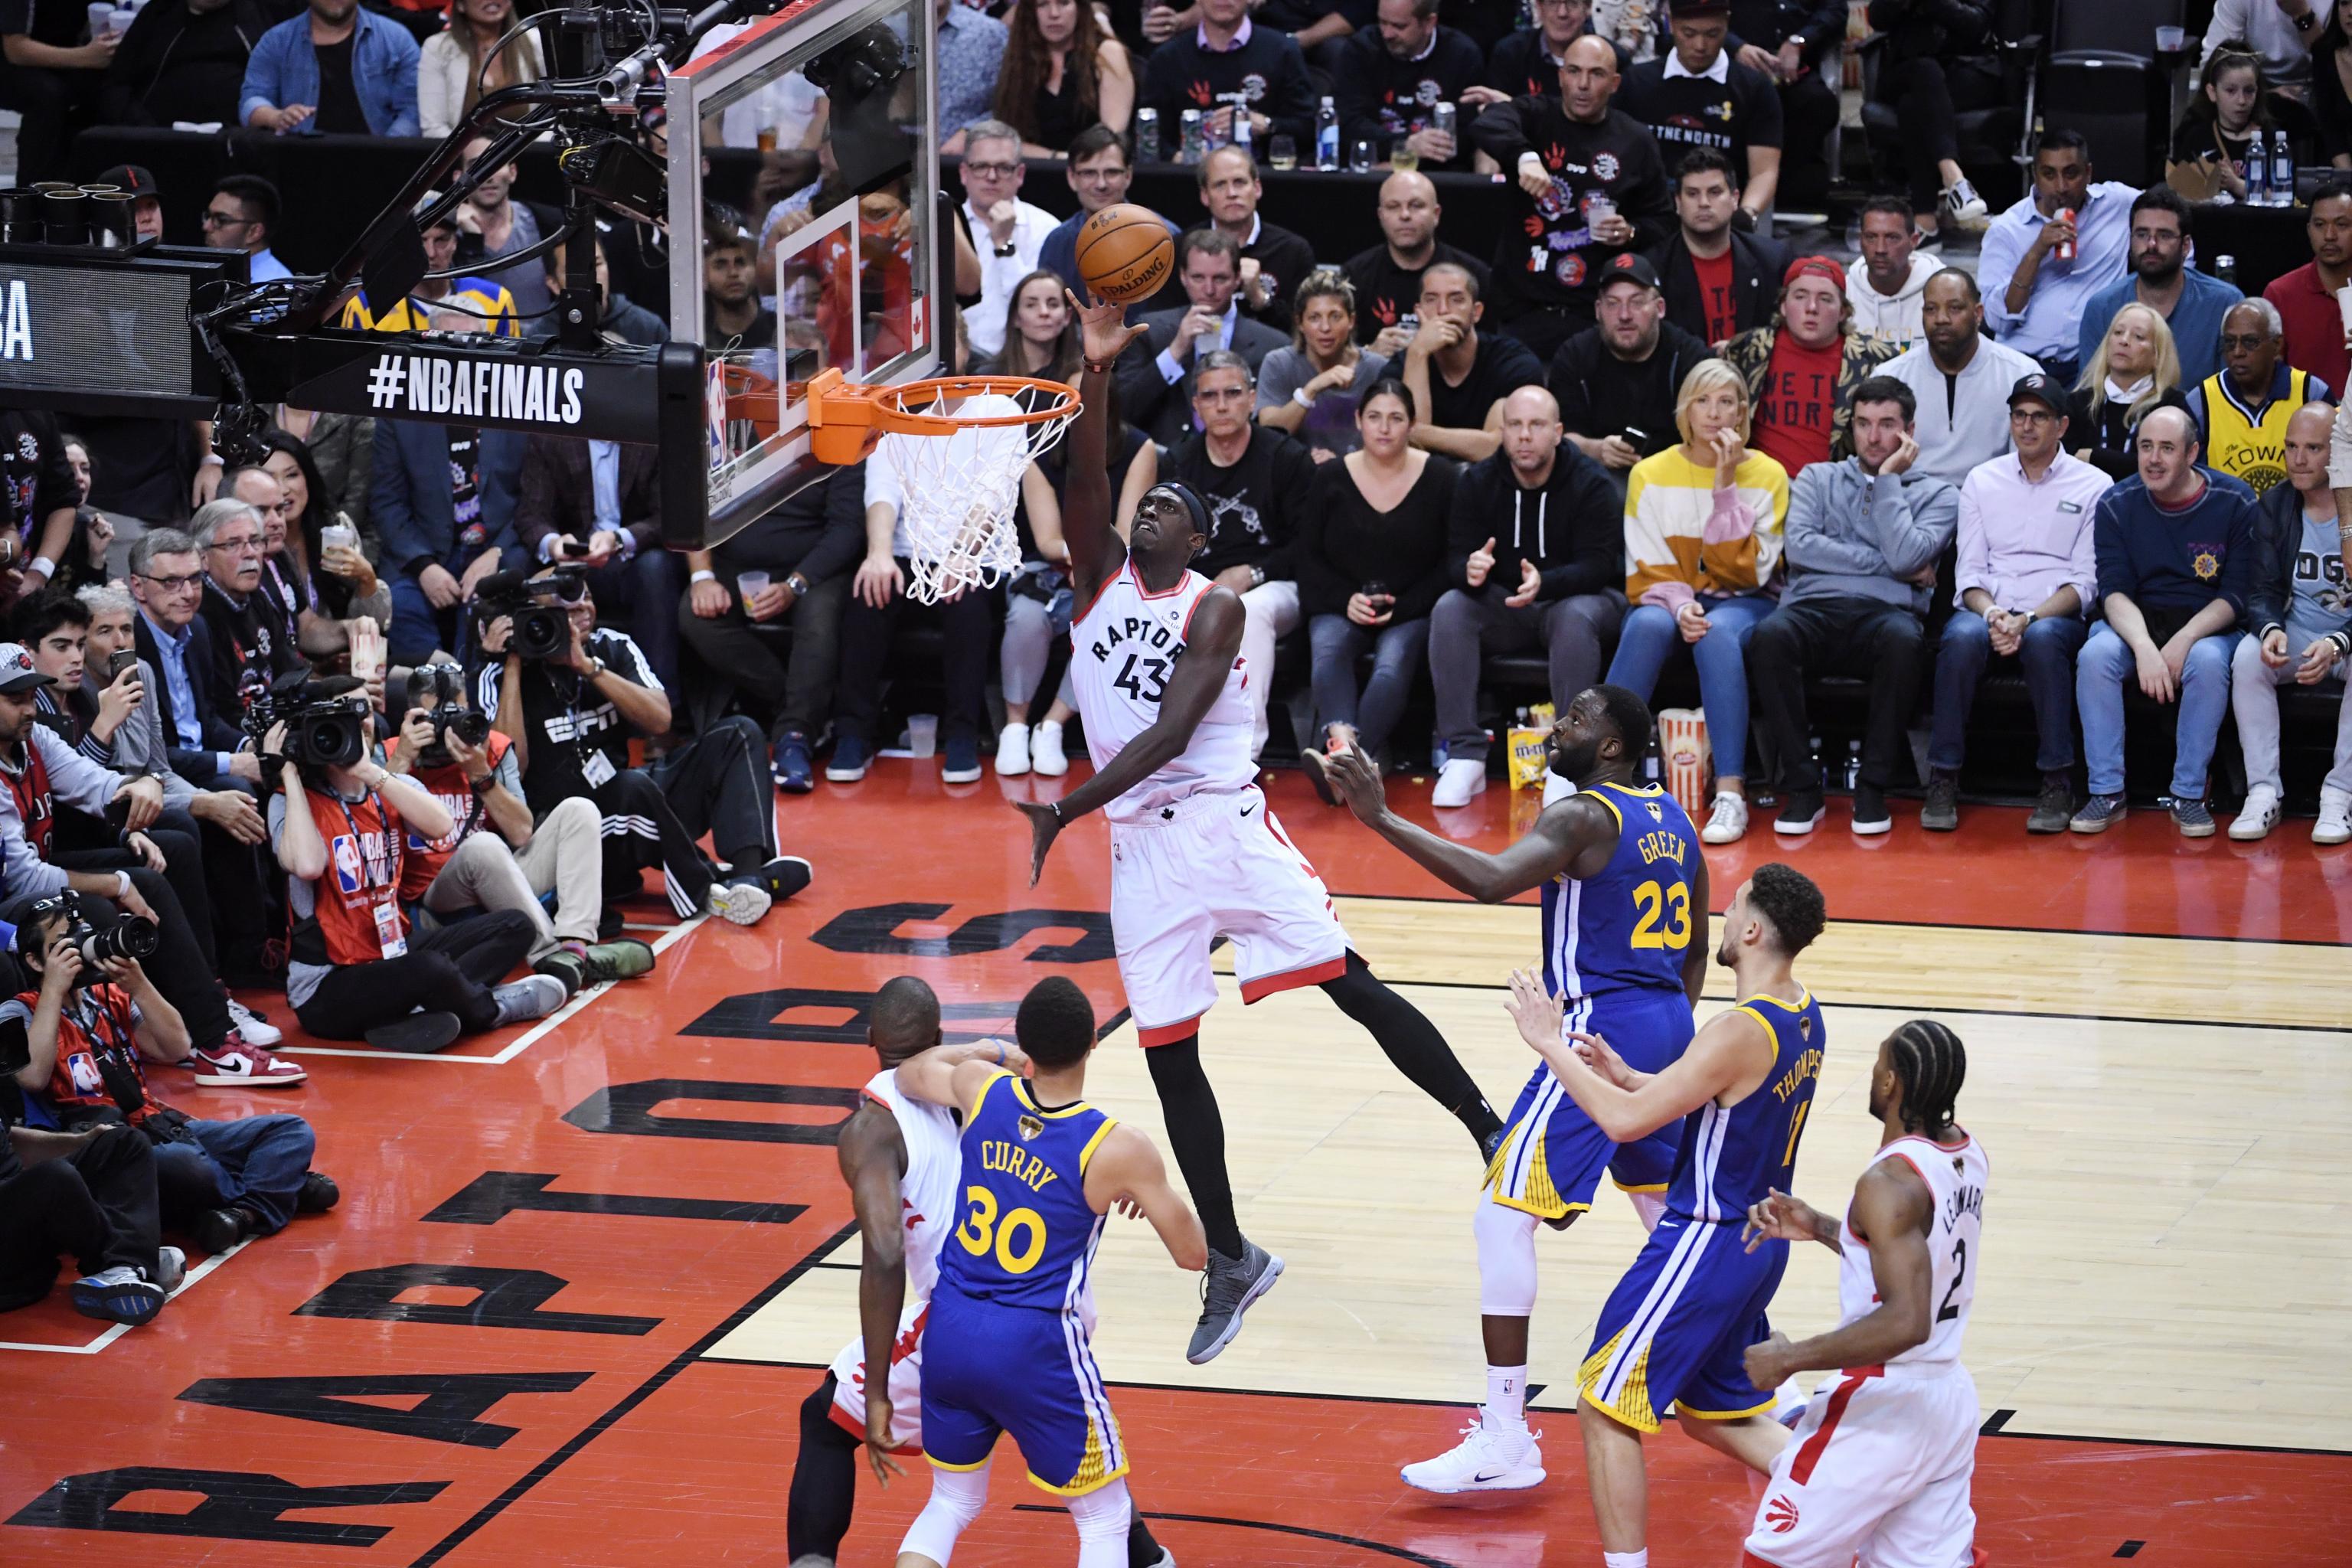 Warriors Vs Raptors Game 1 Stats And Nba Finals 2019 Game 2 Schedule Odds Bleacher Report Latest News Videos And Highlights